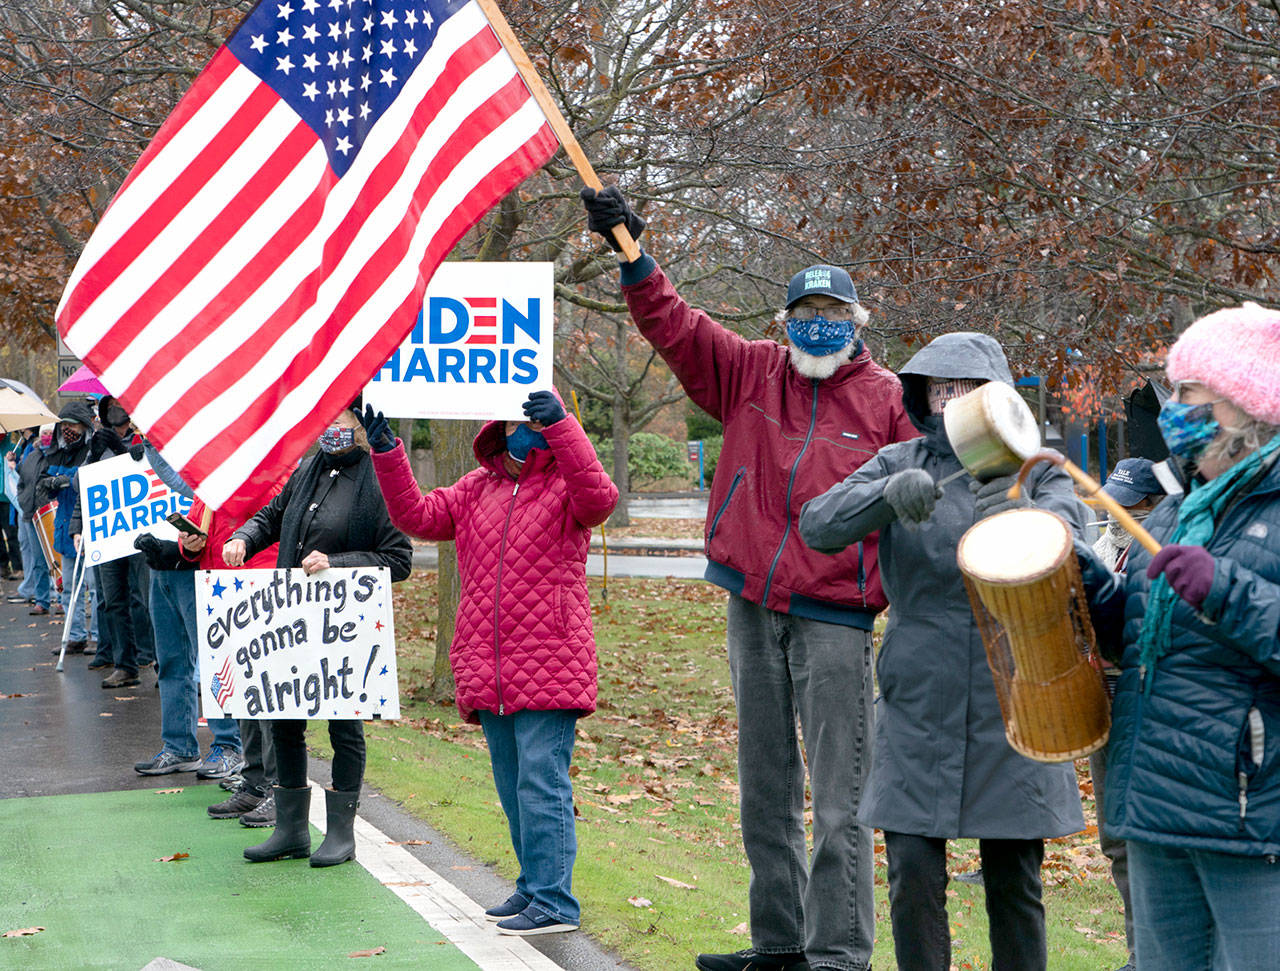 Nearly 200 showed up in the rain at all four corners of Kearney and Sims Way in Port Townsend on Saturday, Nov. 7, 2020, for an inpromptu rally to celebrate the media’s calling of Joe Biden as the next presidert of the United States. (Steve Mullensky/for Peninsula Daily News)